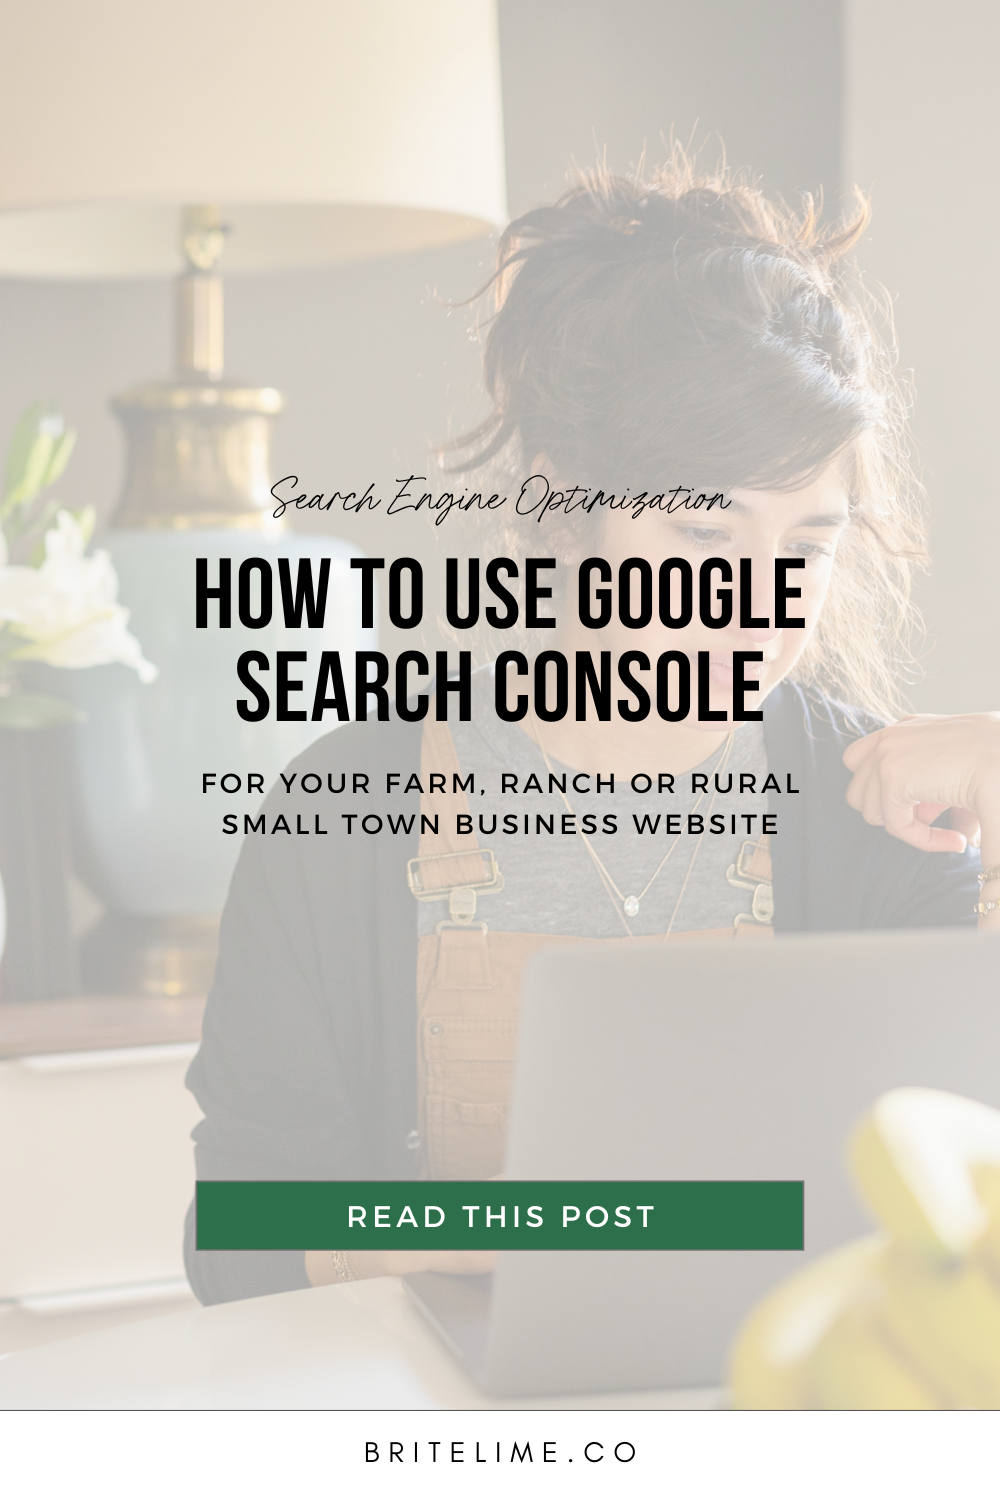 Post cover image showing a woman in overalls sitting at a laptop. Graphic overlay reads: How to Use Google Search Console